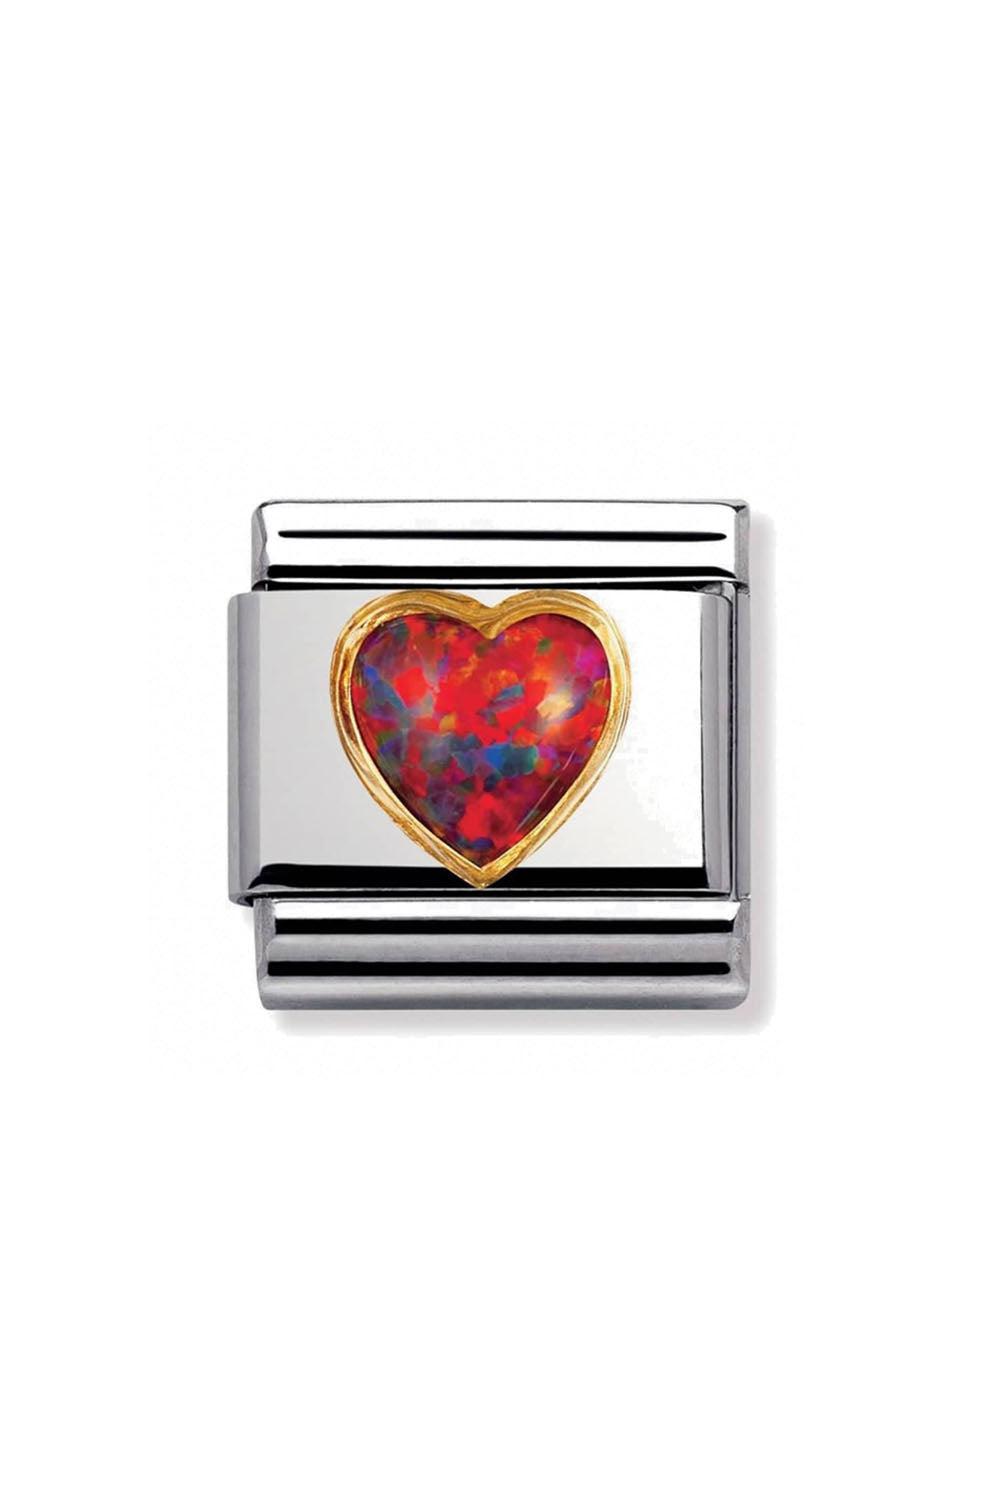 Stones Heart 18k Gold & Red Opal